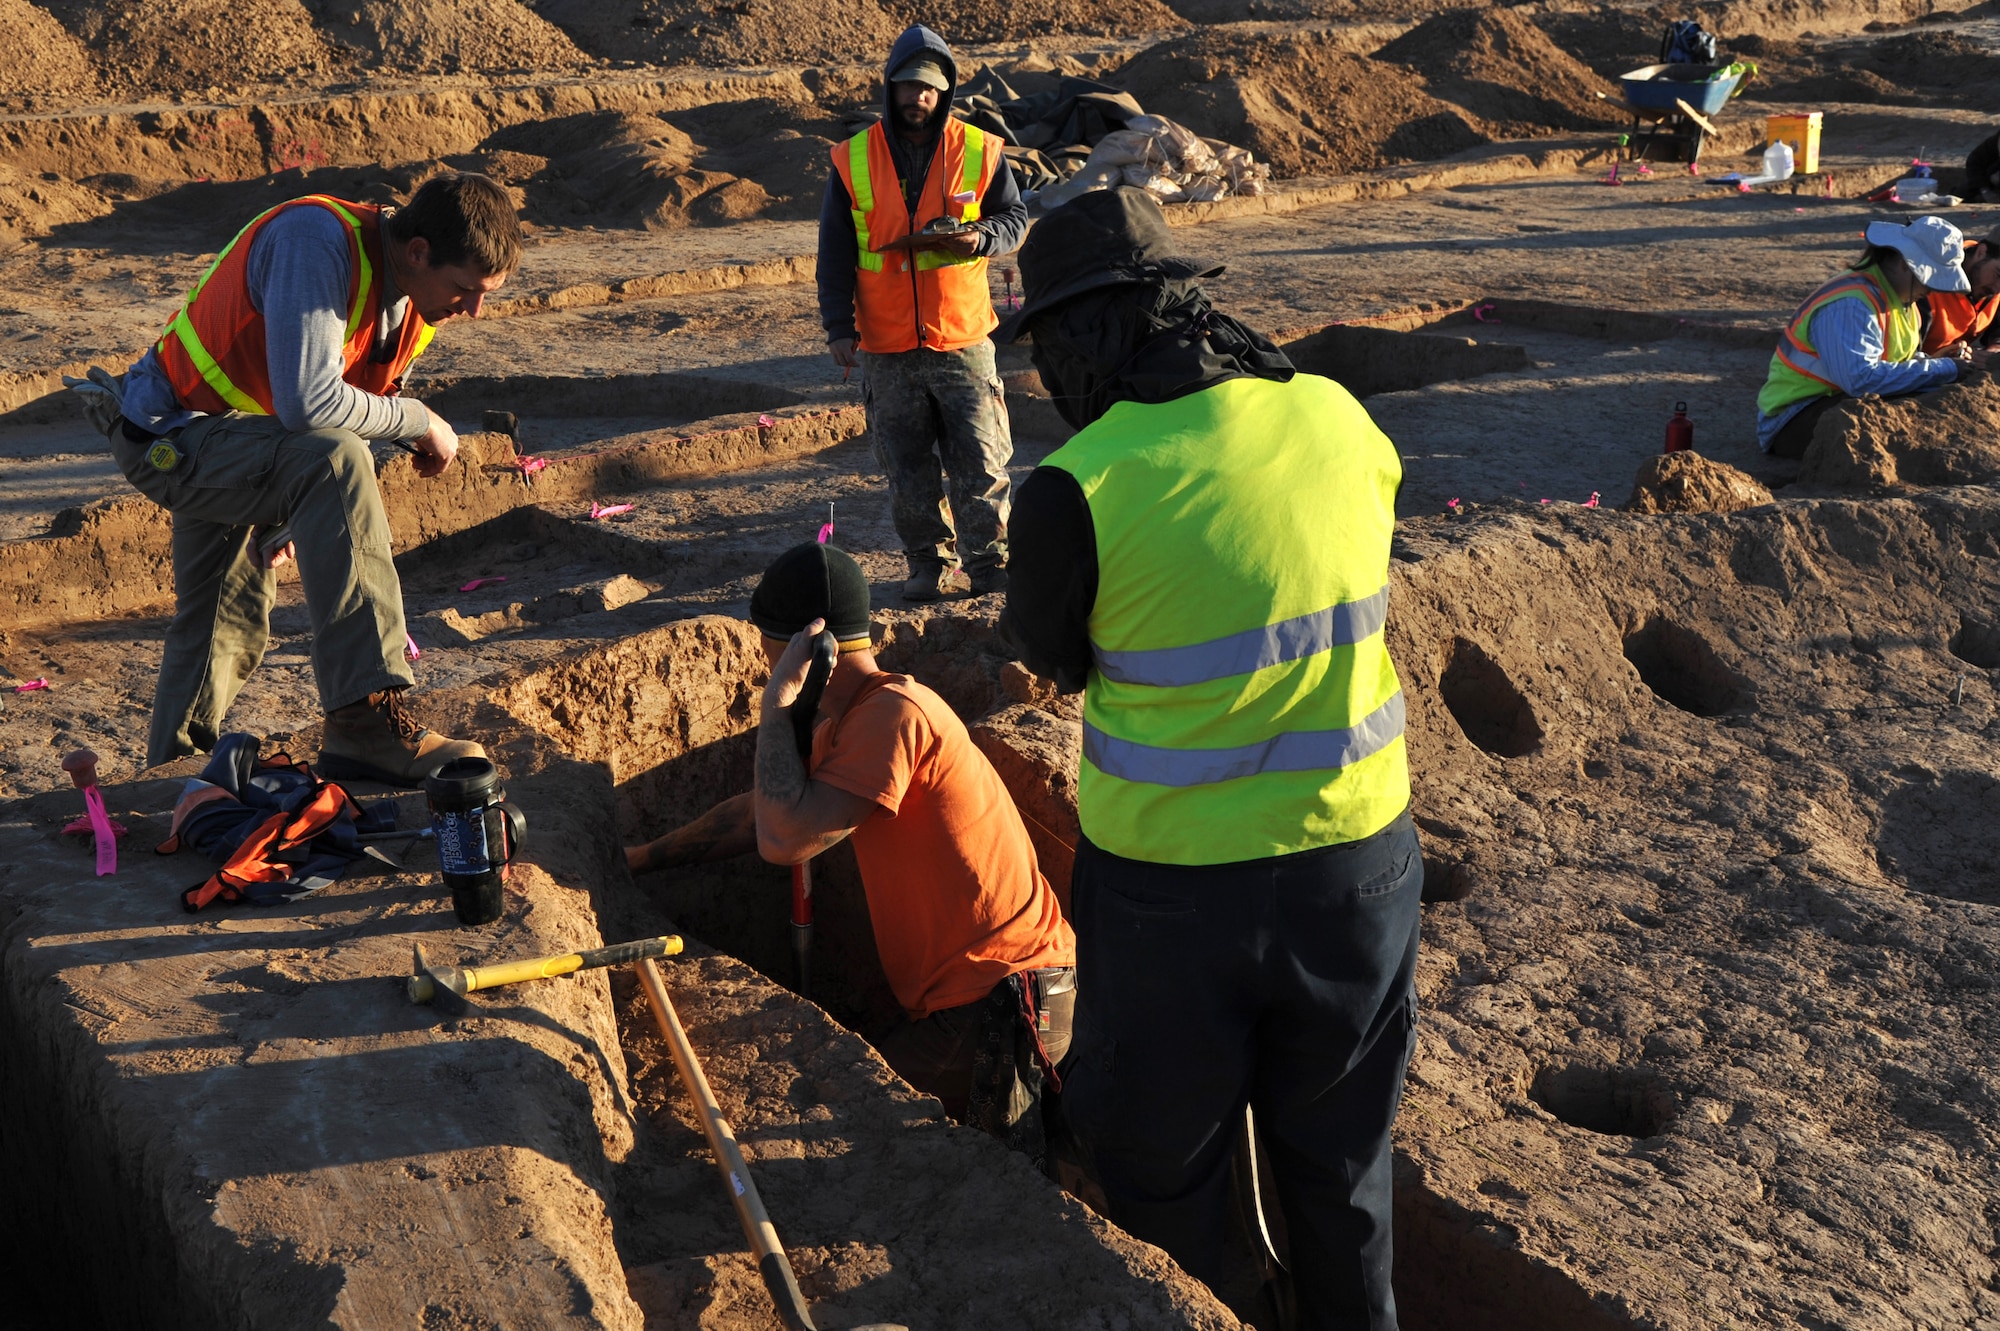 Archaeologists escavate land Feb. 9 at Luke Air Force Base in order to make way for a solar array the base is planning to build.  The excavation team has found thousands of artifacts dating back to 3000 B.C..  (U.S. Air Force photo by Senior Airman Sandra Welch)